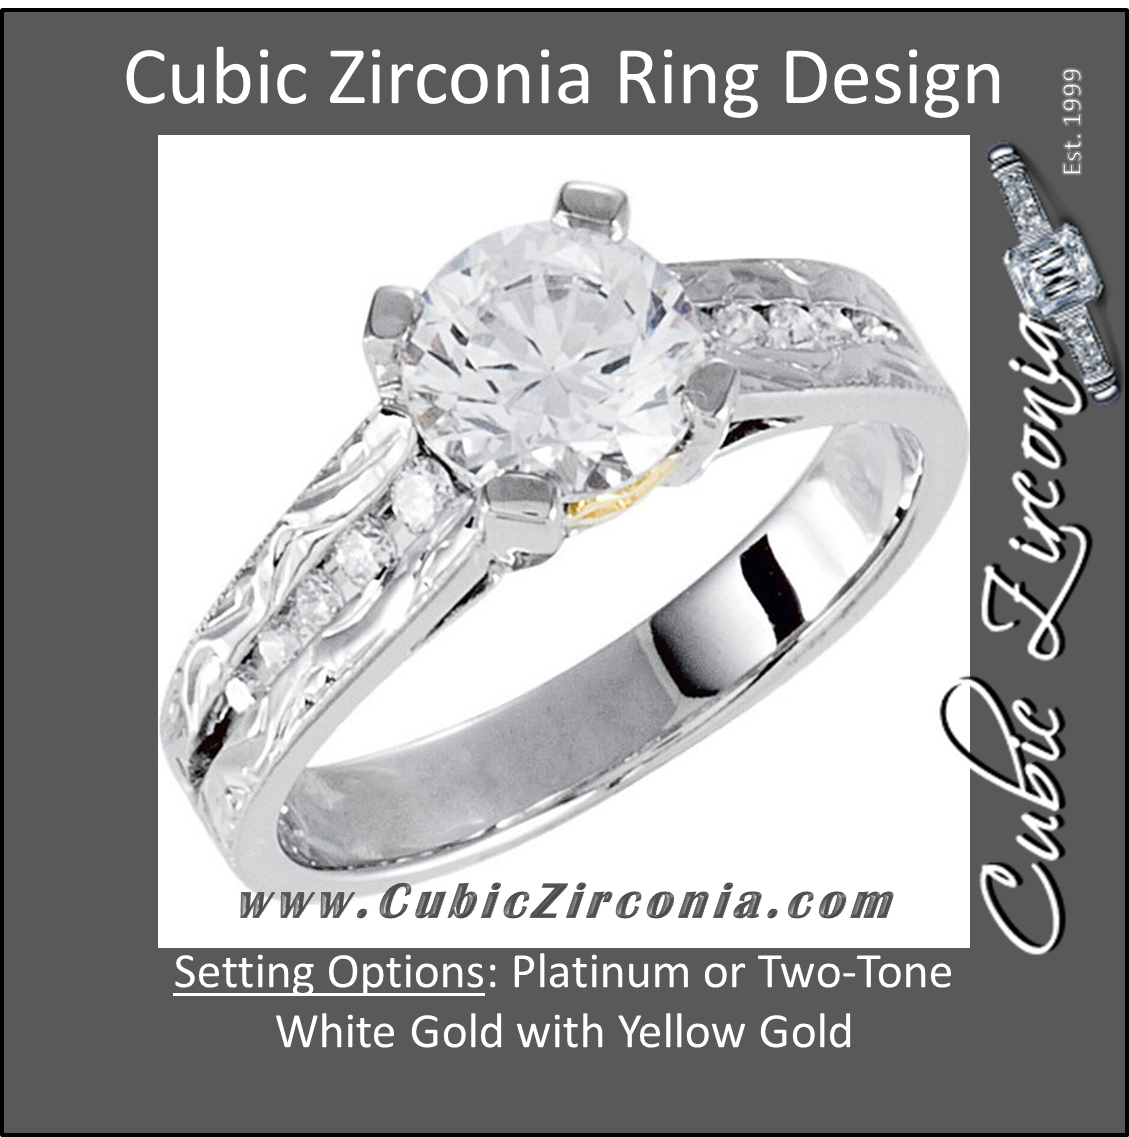 Cubic Zirconia Engagement Ring- The Krista (Round 1.0 CT Tapered Channel Setting with Hand-Engraved Band and Two-Tone Metal Color)